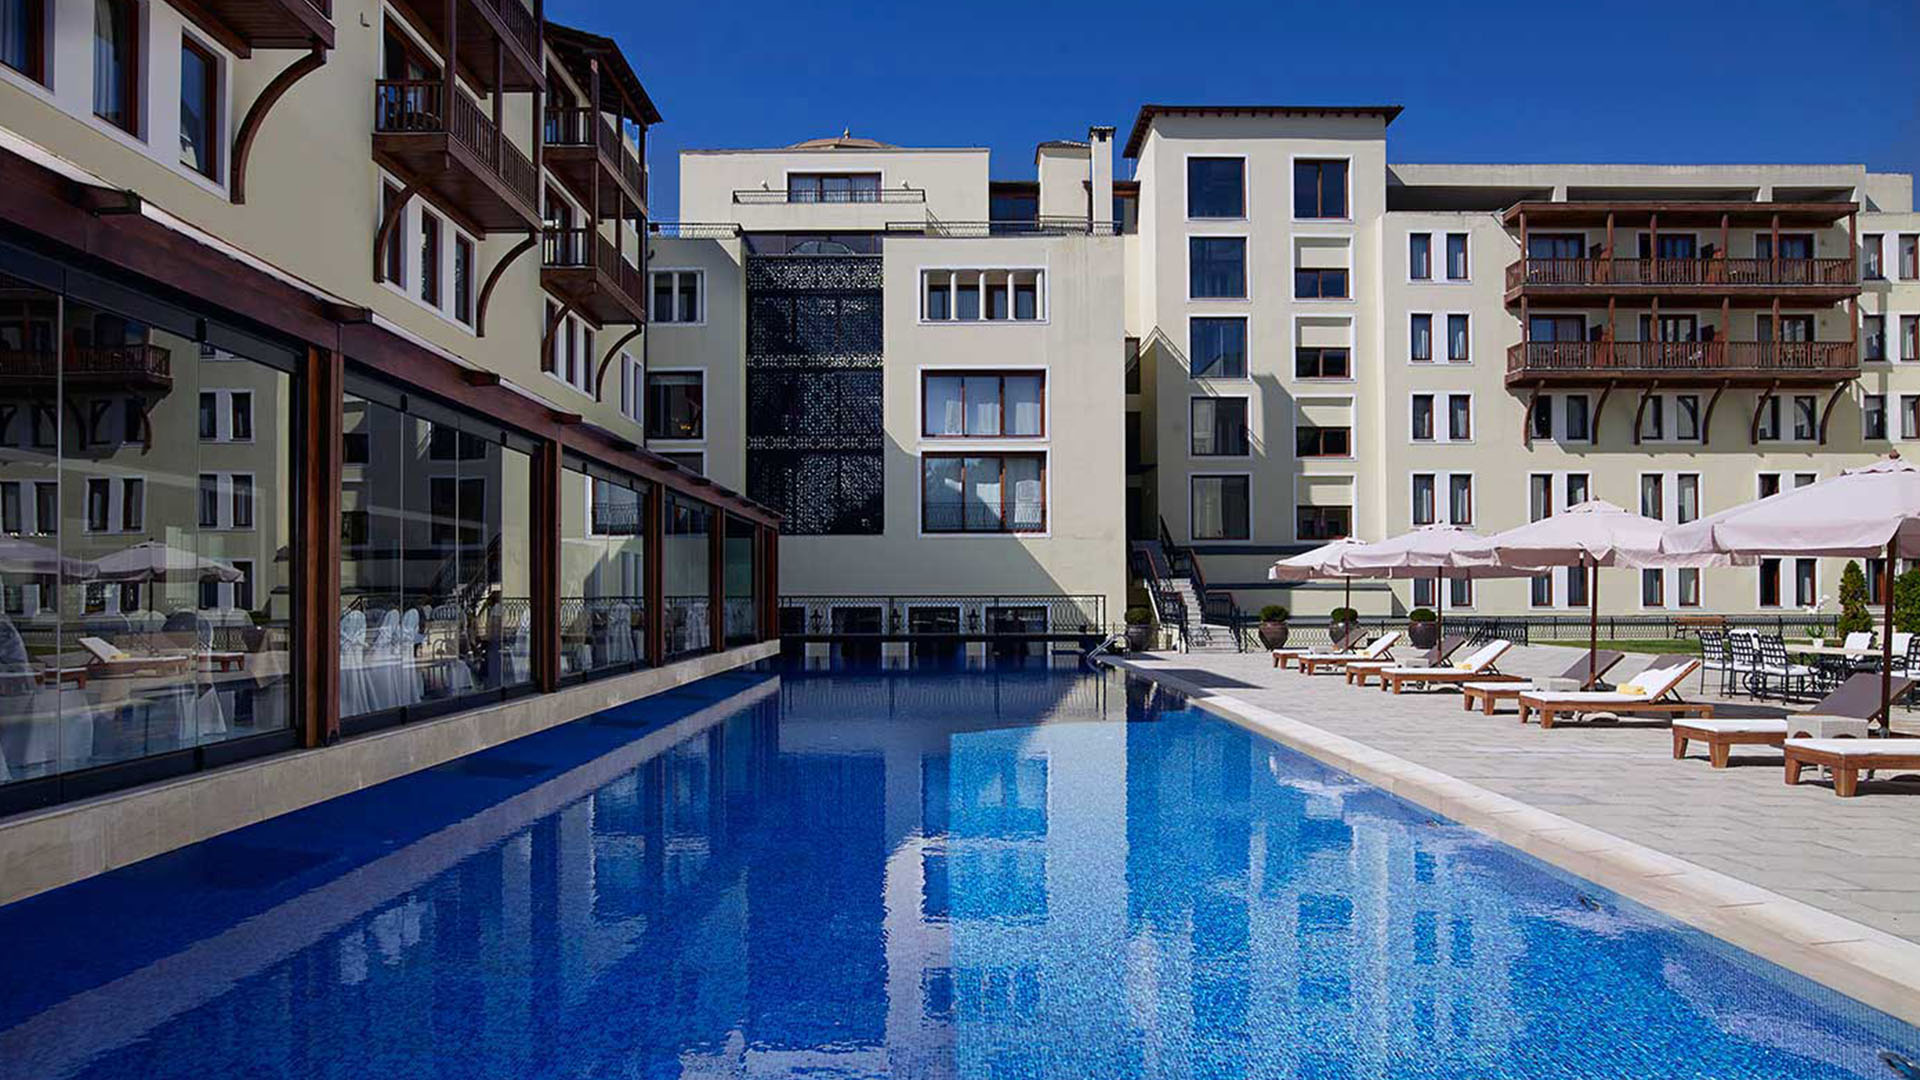 5* Grand Serai Hotel - Ιωάννινα ✦ -50% ✦ 3 Ημέρες (2 Διανυκτερεύσεις) ✦ 2 άτομα + 2 παιδιά έως 4 ετών ✦ 8 ✦ έως 30/06/2023 και 01/09/2023 έως 30/09/2023 ✦ Early check in και Late check out κατόπιν διαθεσιμότητας!